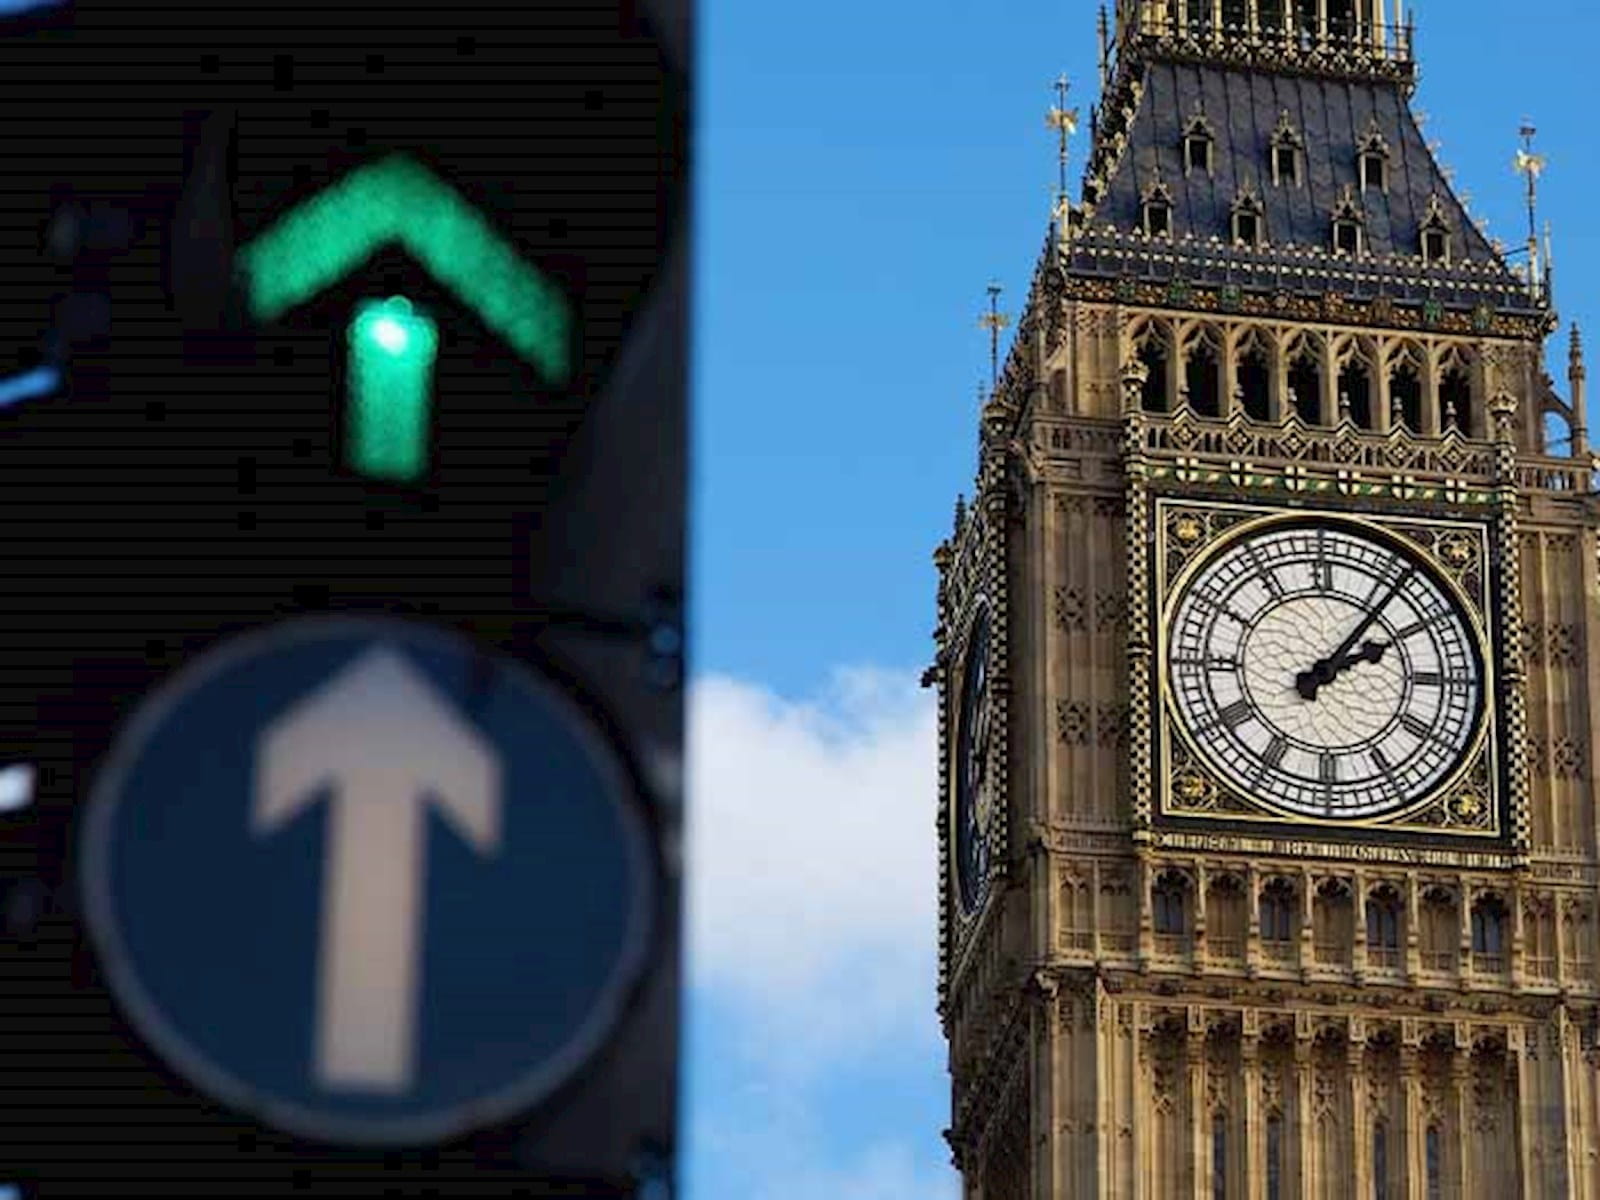 Westminster clock tower London parliament in front of blue sky with a green arrow traffic light next to it